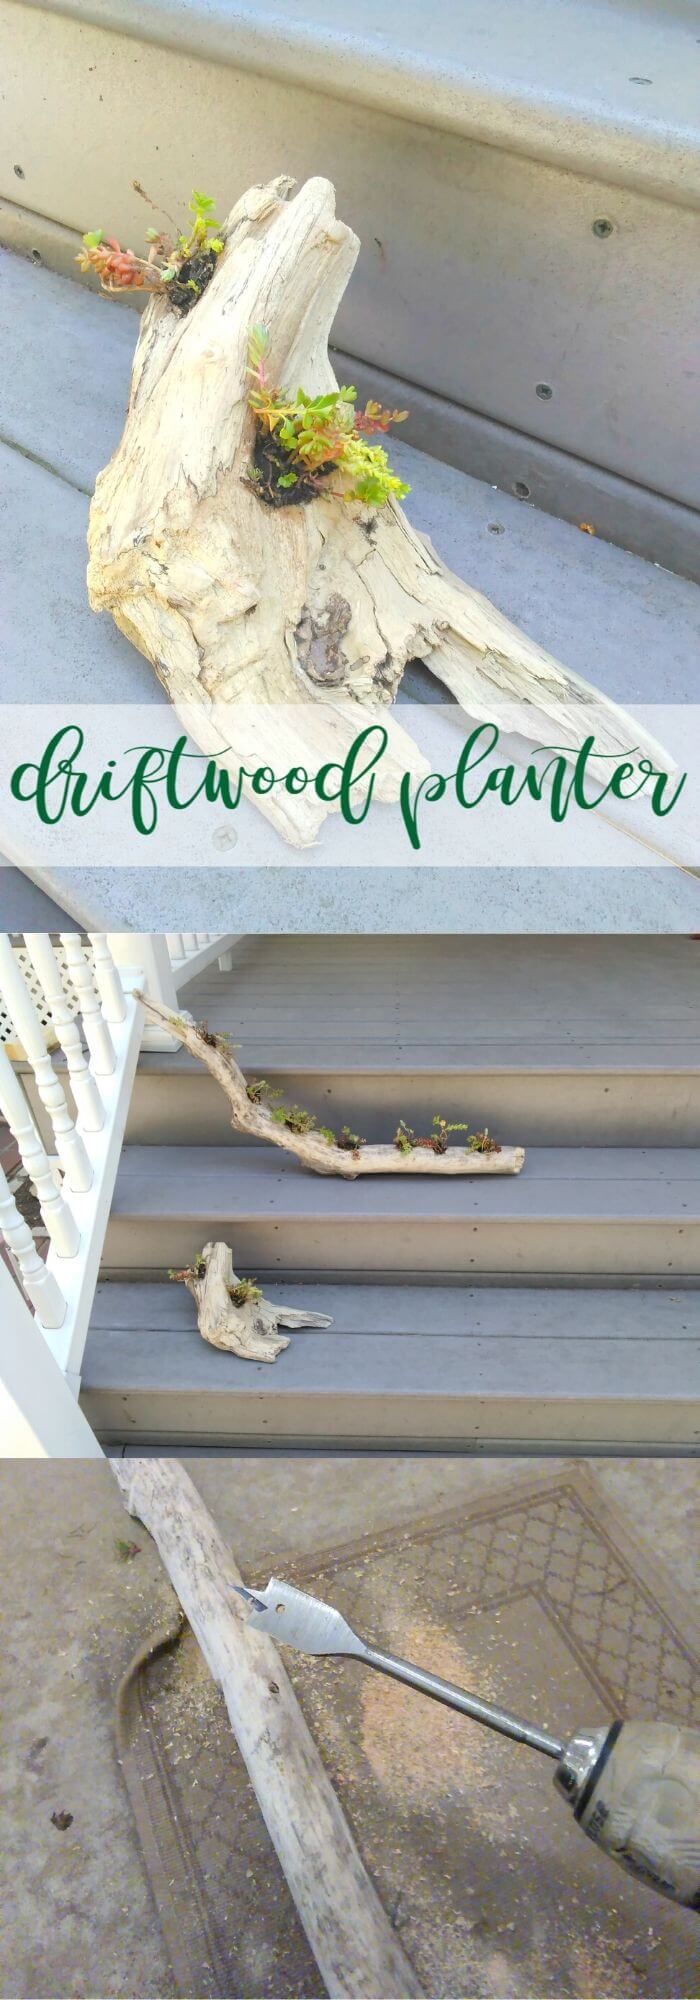 18 driftwood craft projects